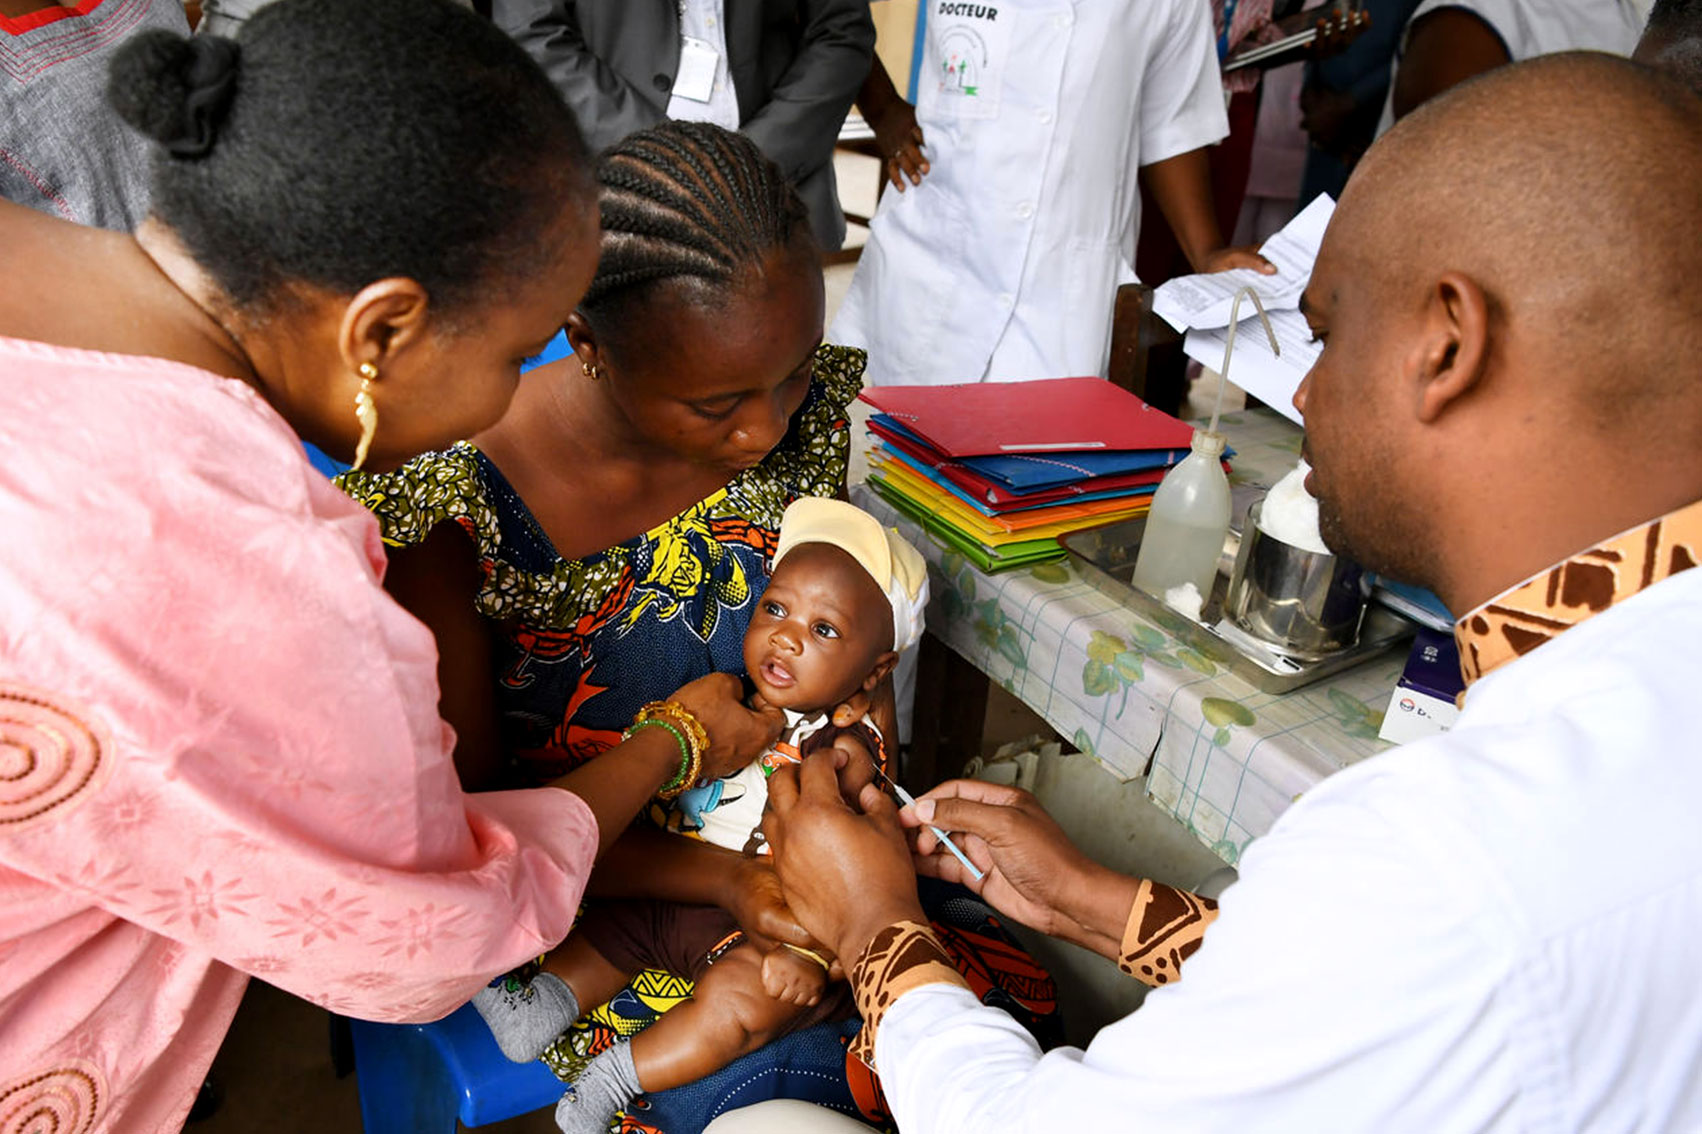 A woman distracts a baby while Aboubacar administers a shot to the child's arm.